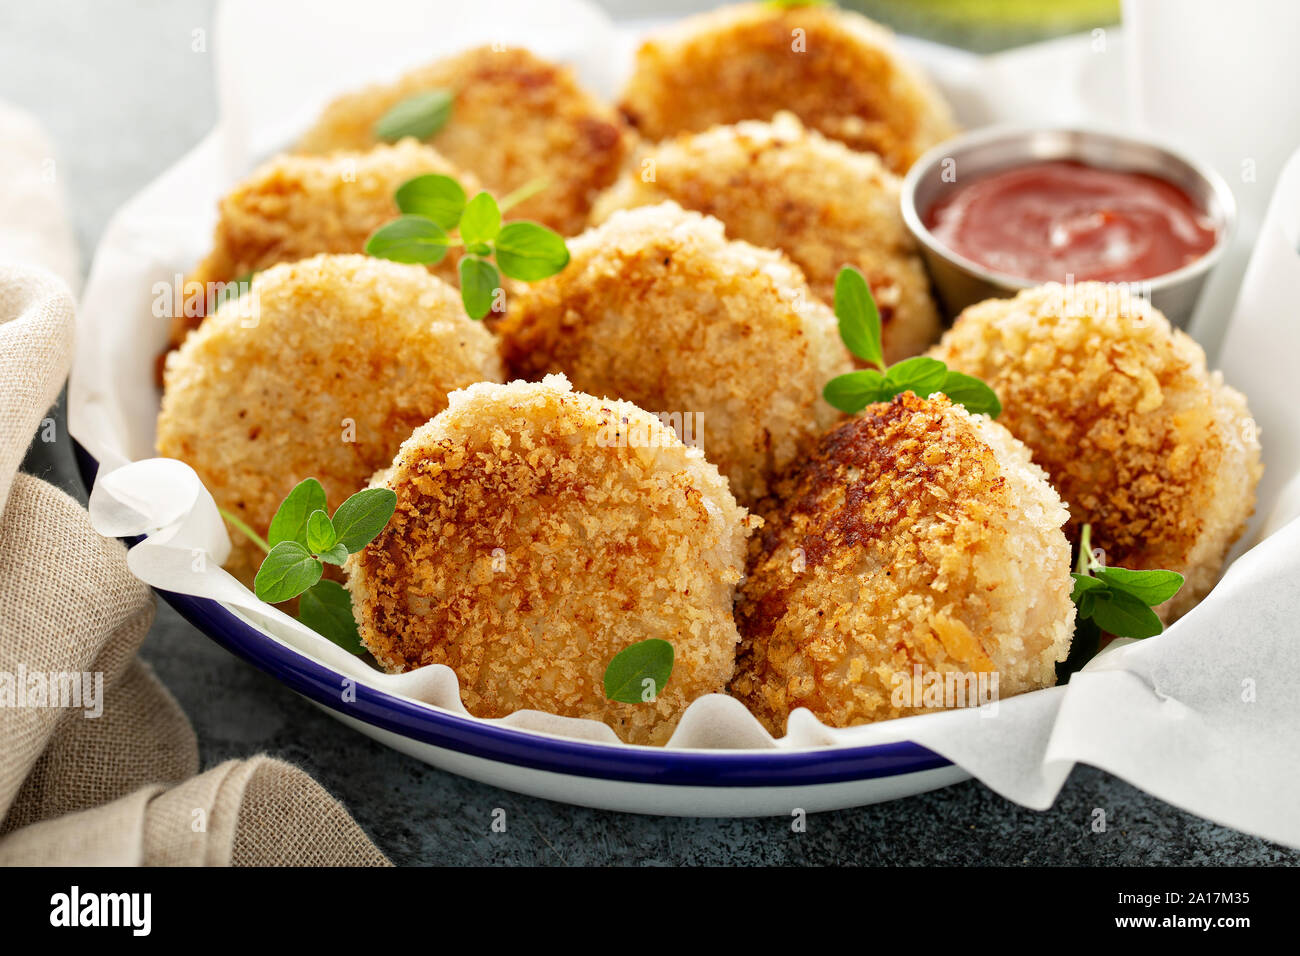 Chicken patties or fish cakes fried in breadcrumbs with ketchup Stock Photo